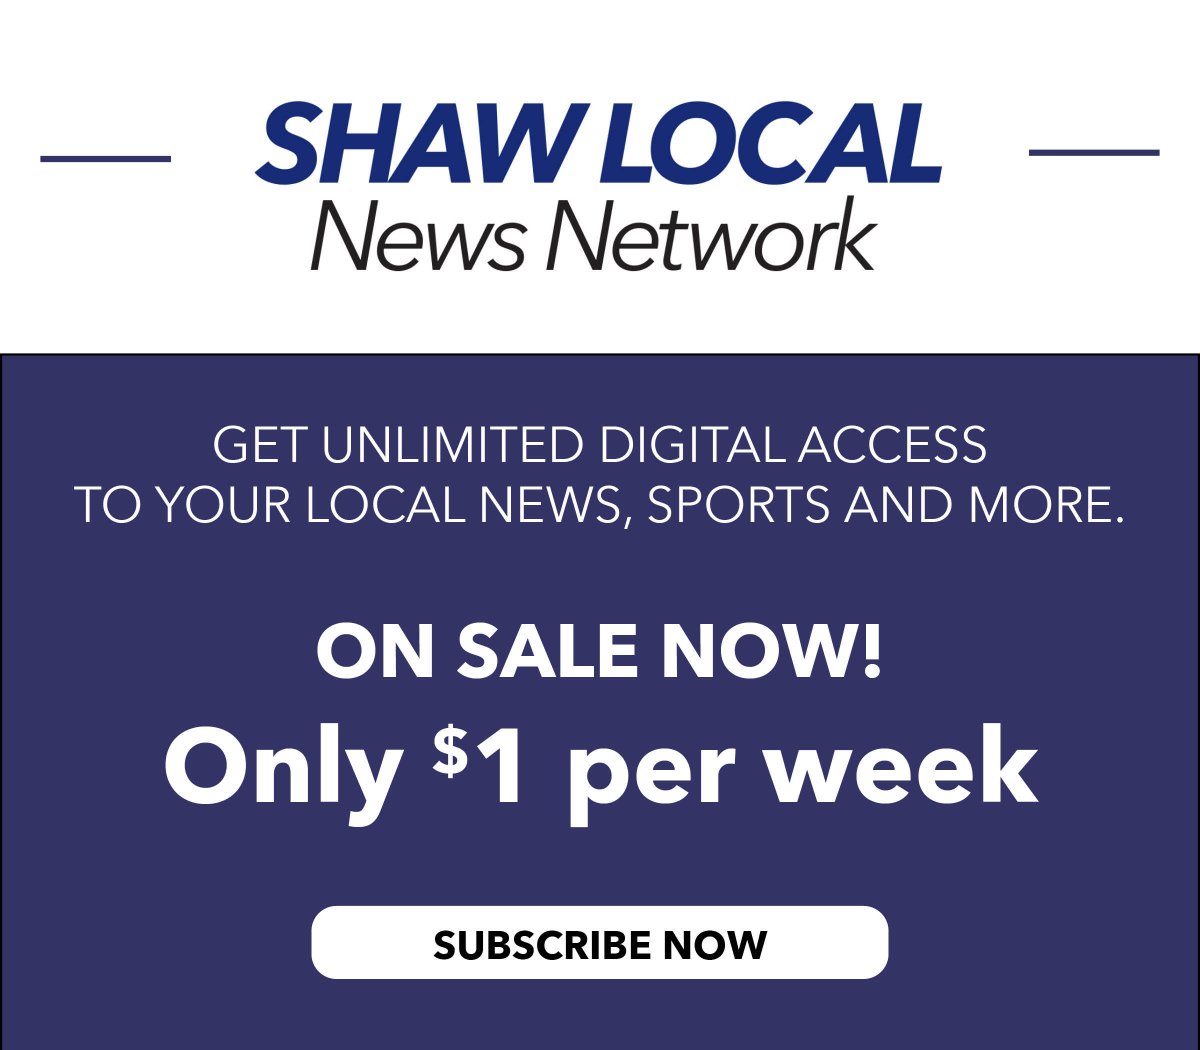 Support local journalism for only $1/week. Click here: shawlocal.com/subscribe/sale…